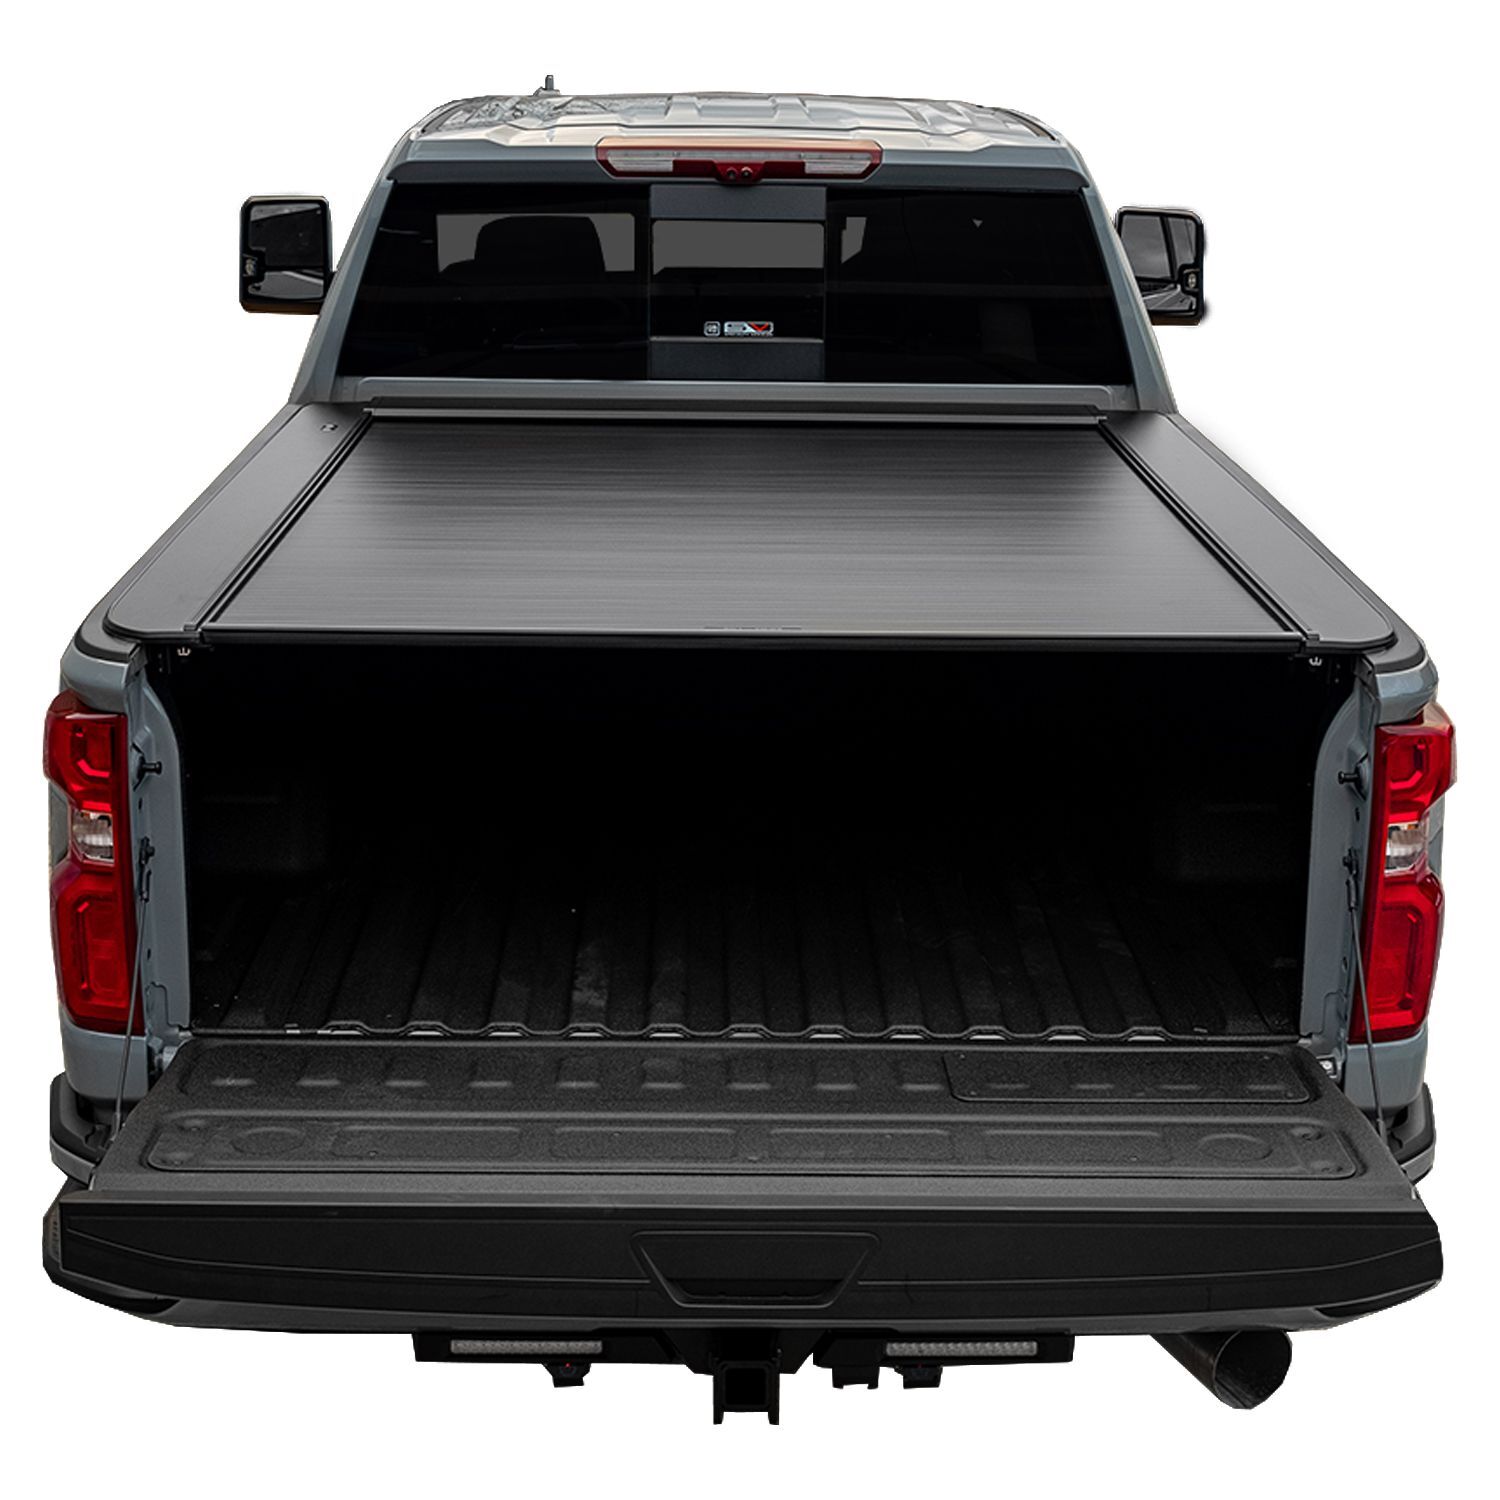 HSP ROLL R COVER TO SUIT CHEVROLET SILVERADO 2500